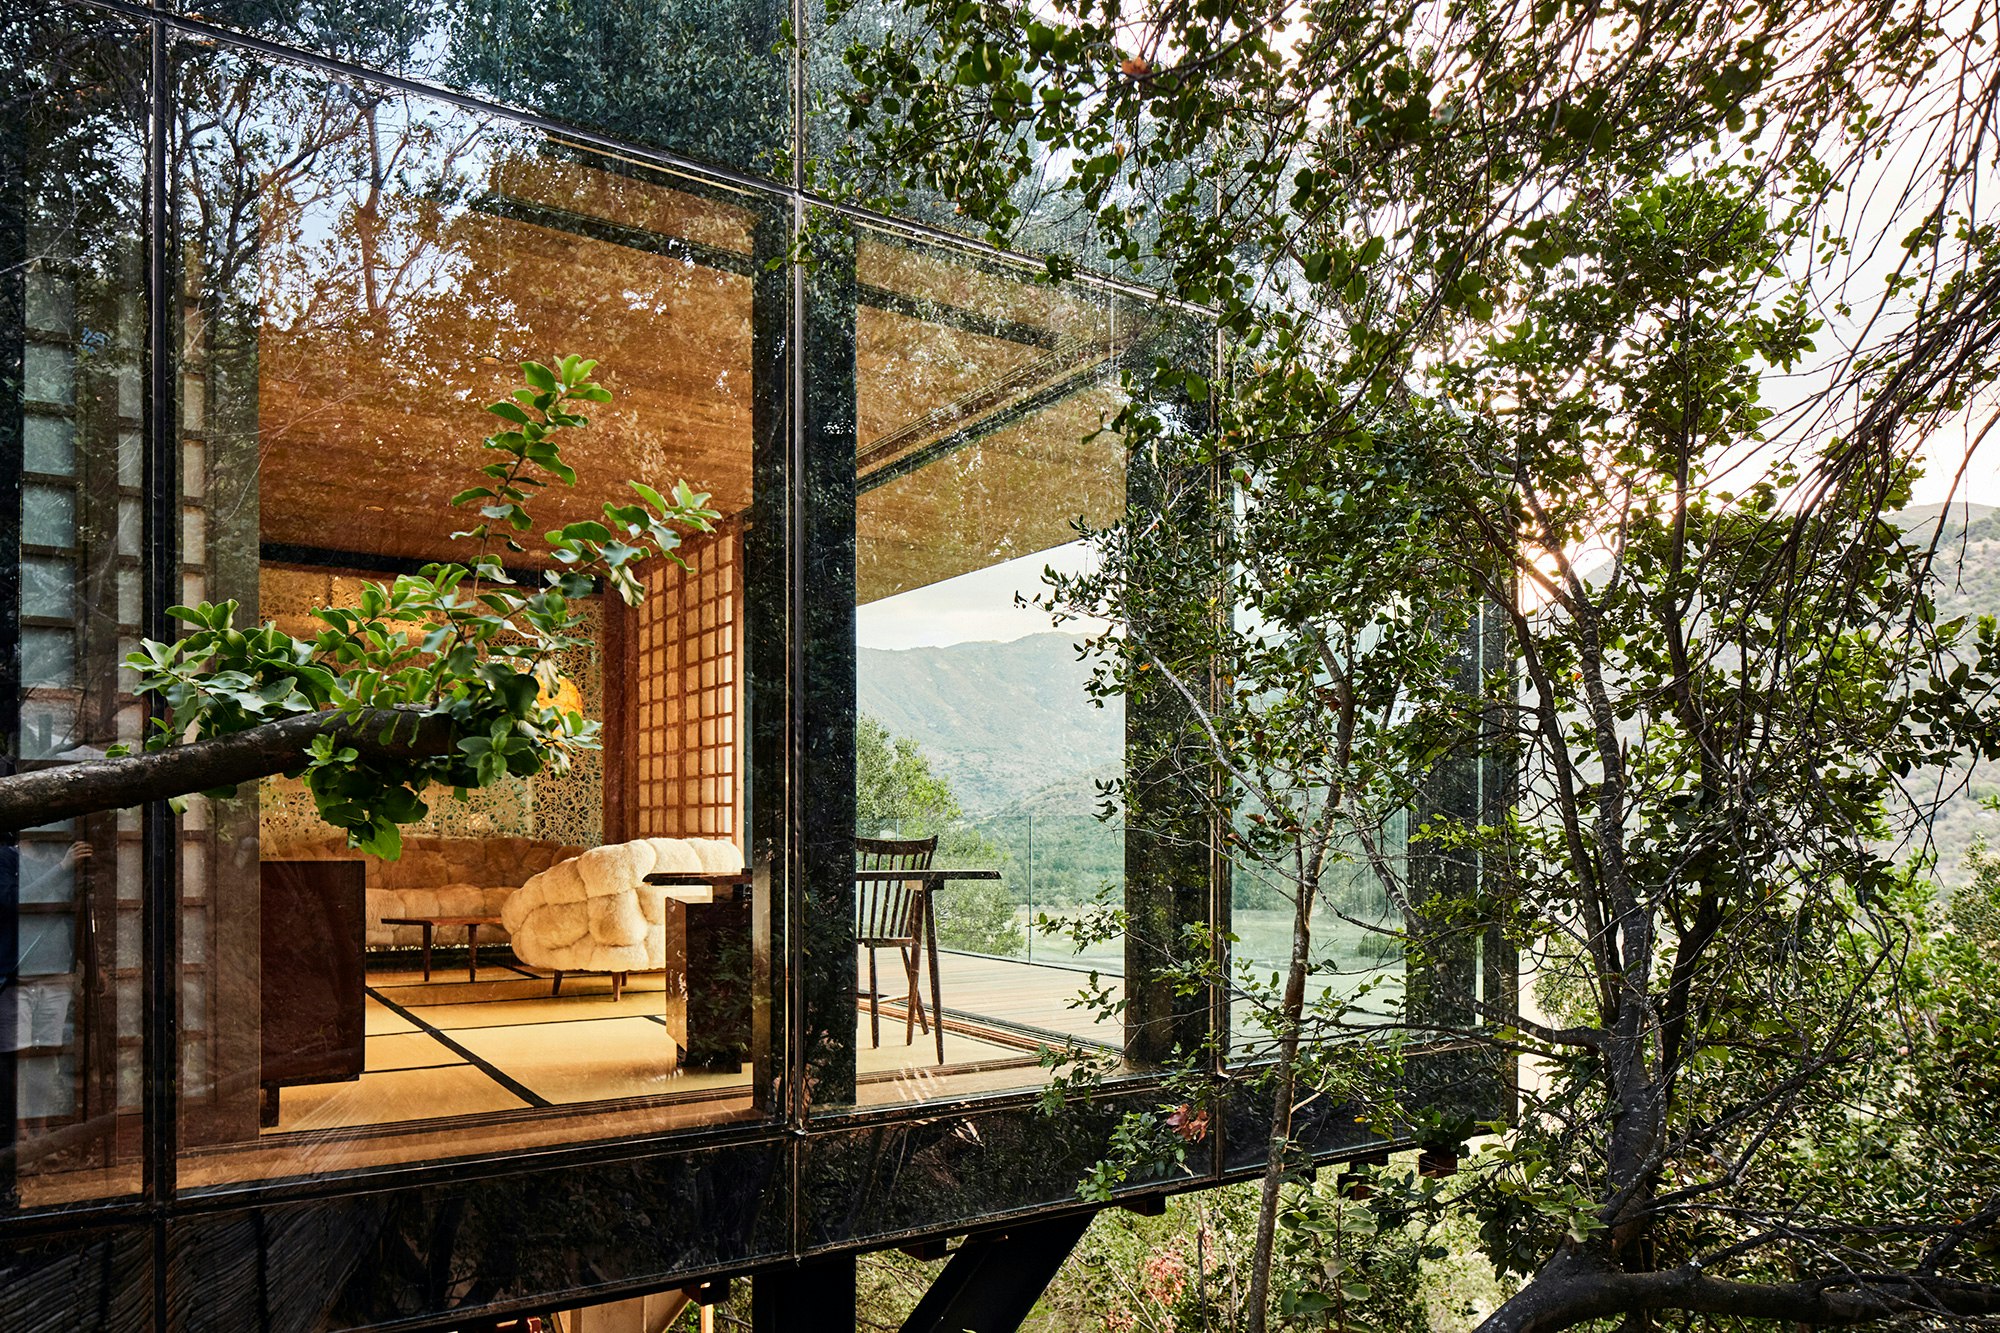 Lush trees grow around a luxurious, glass-walled cabin; the interior is furnished in minimalist style.